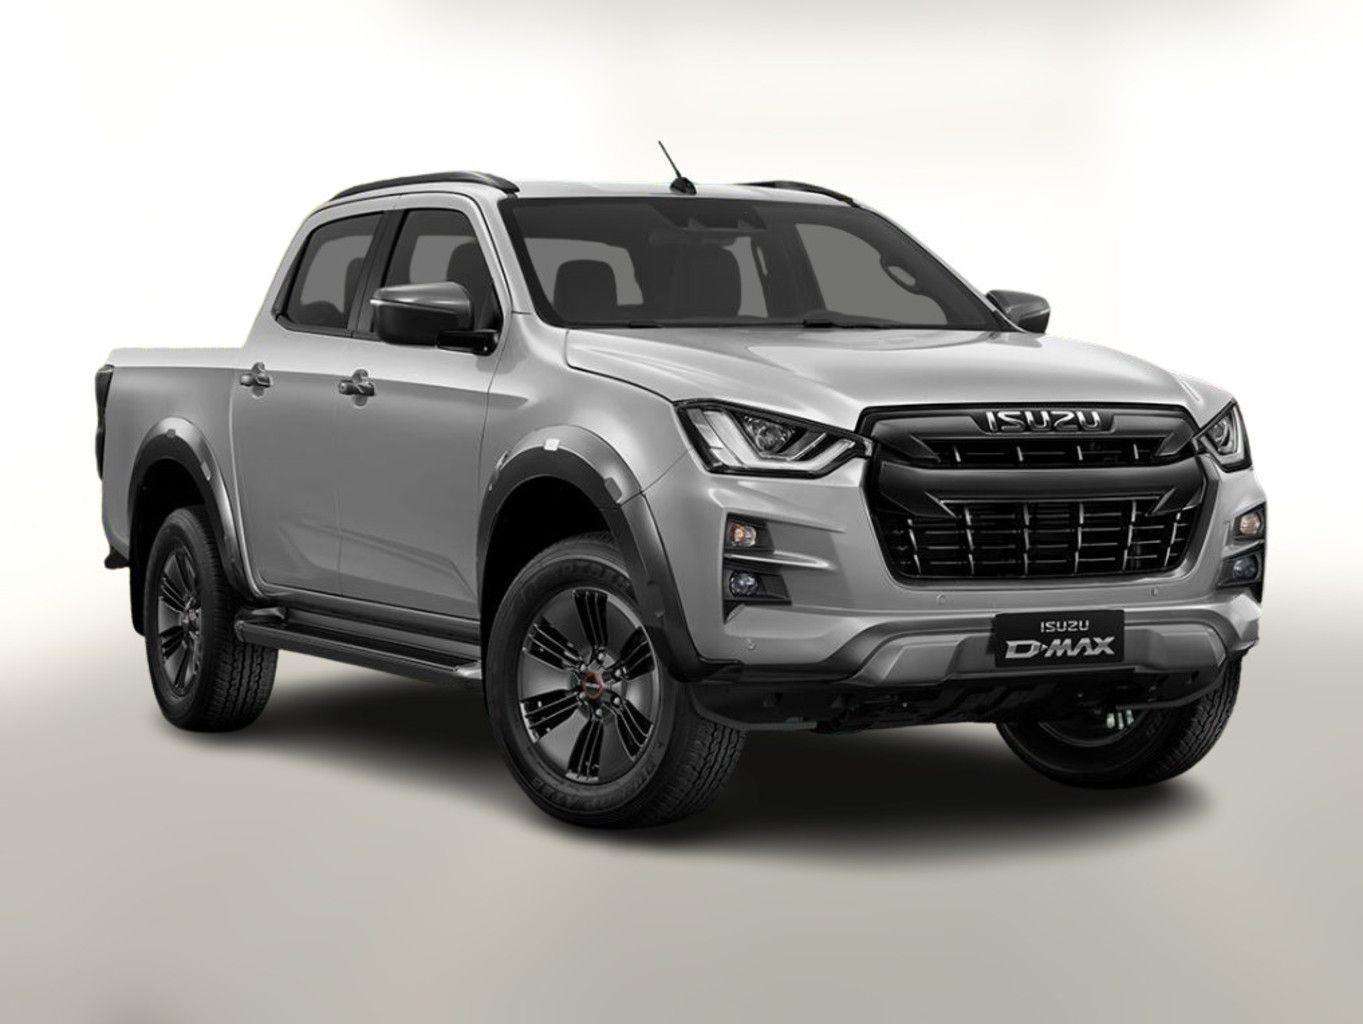 Isuzu D-Max Off-Road/Pick-up in Silver pre-registered in Winden am See for € 63,809.-